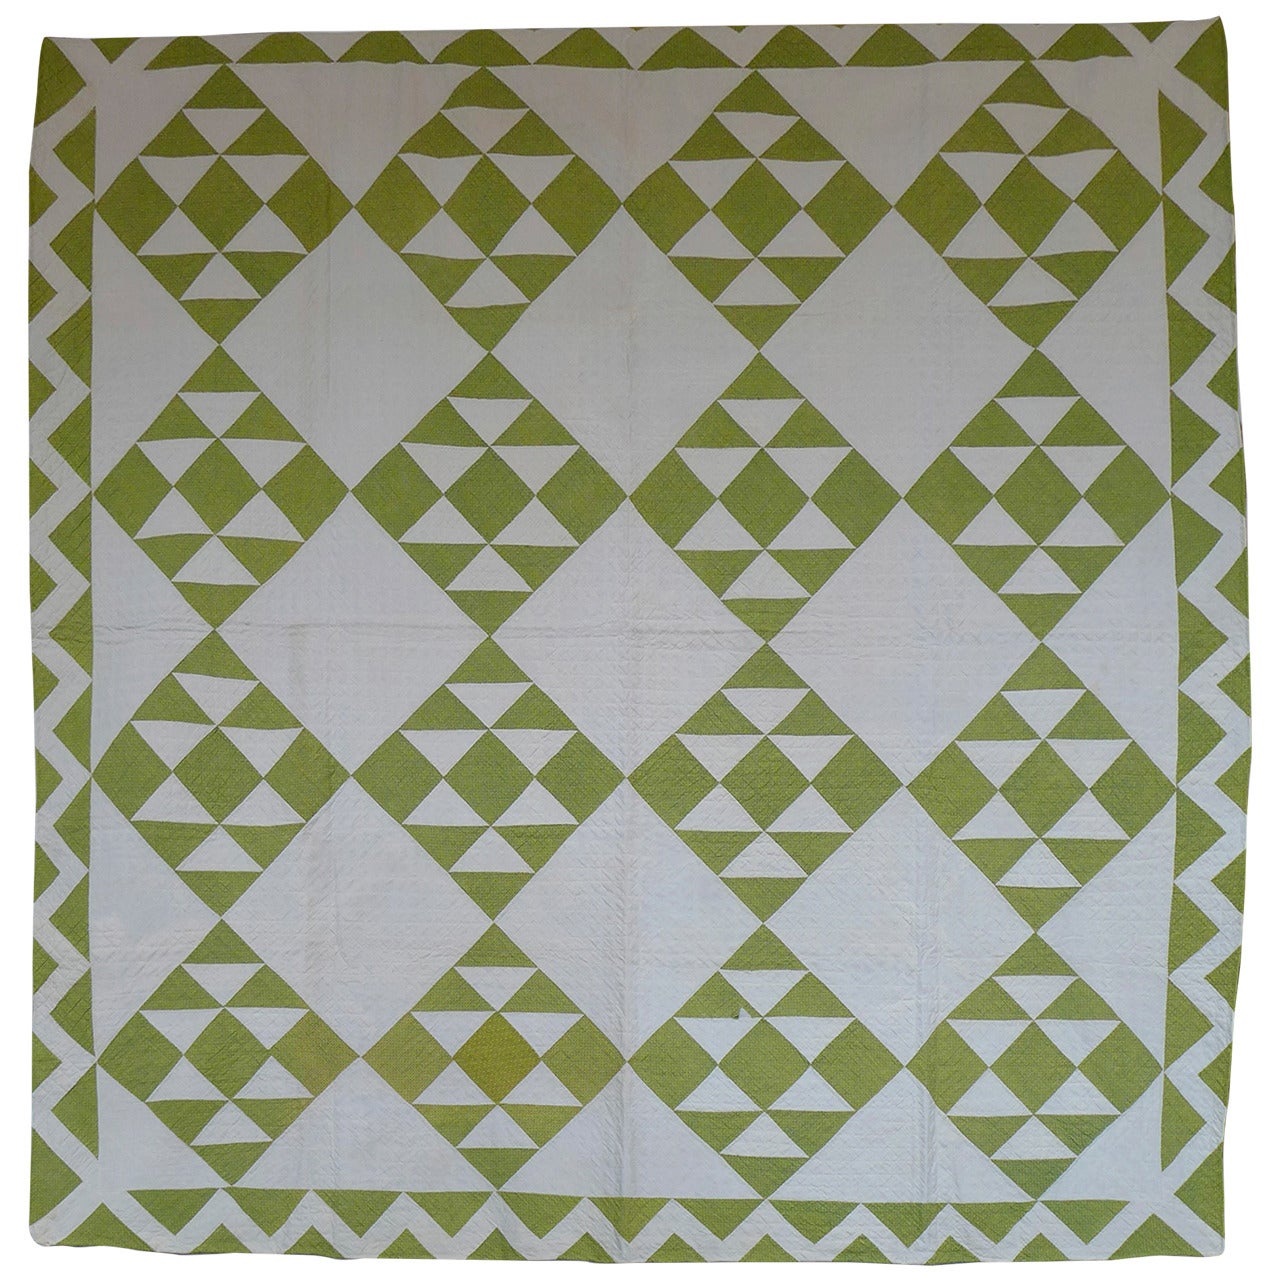 Double Pyramids Quilt with Bold Zigzag Border